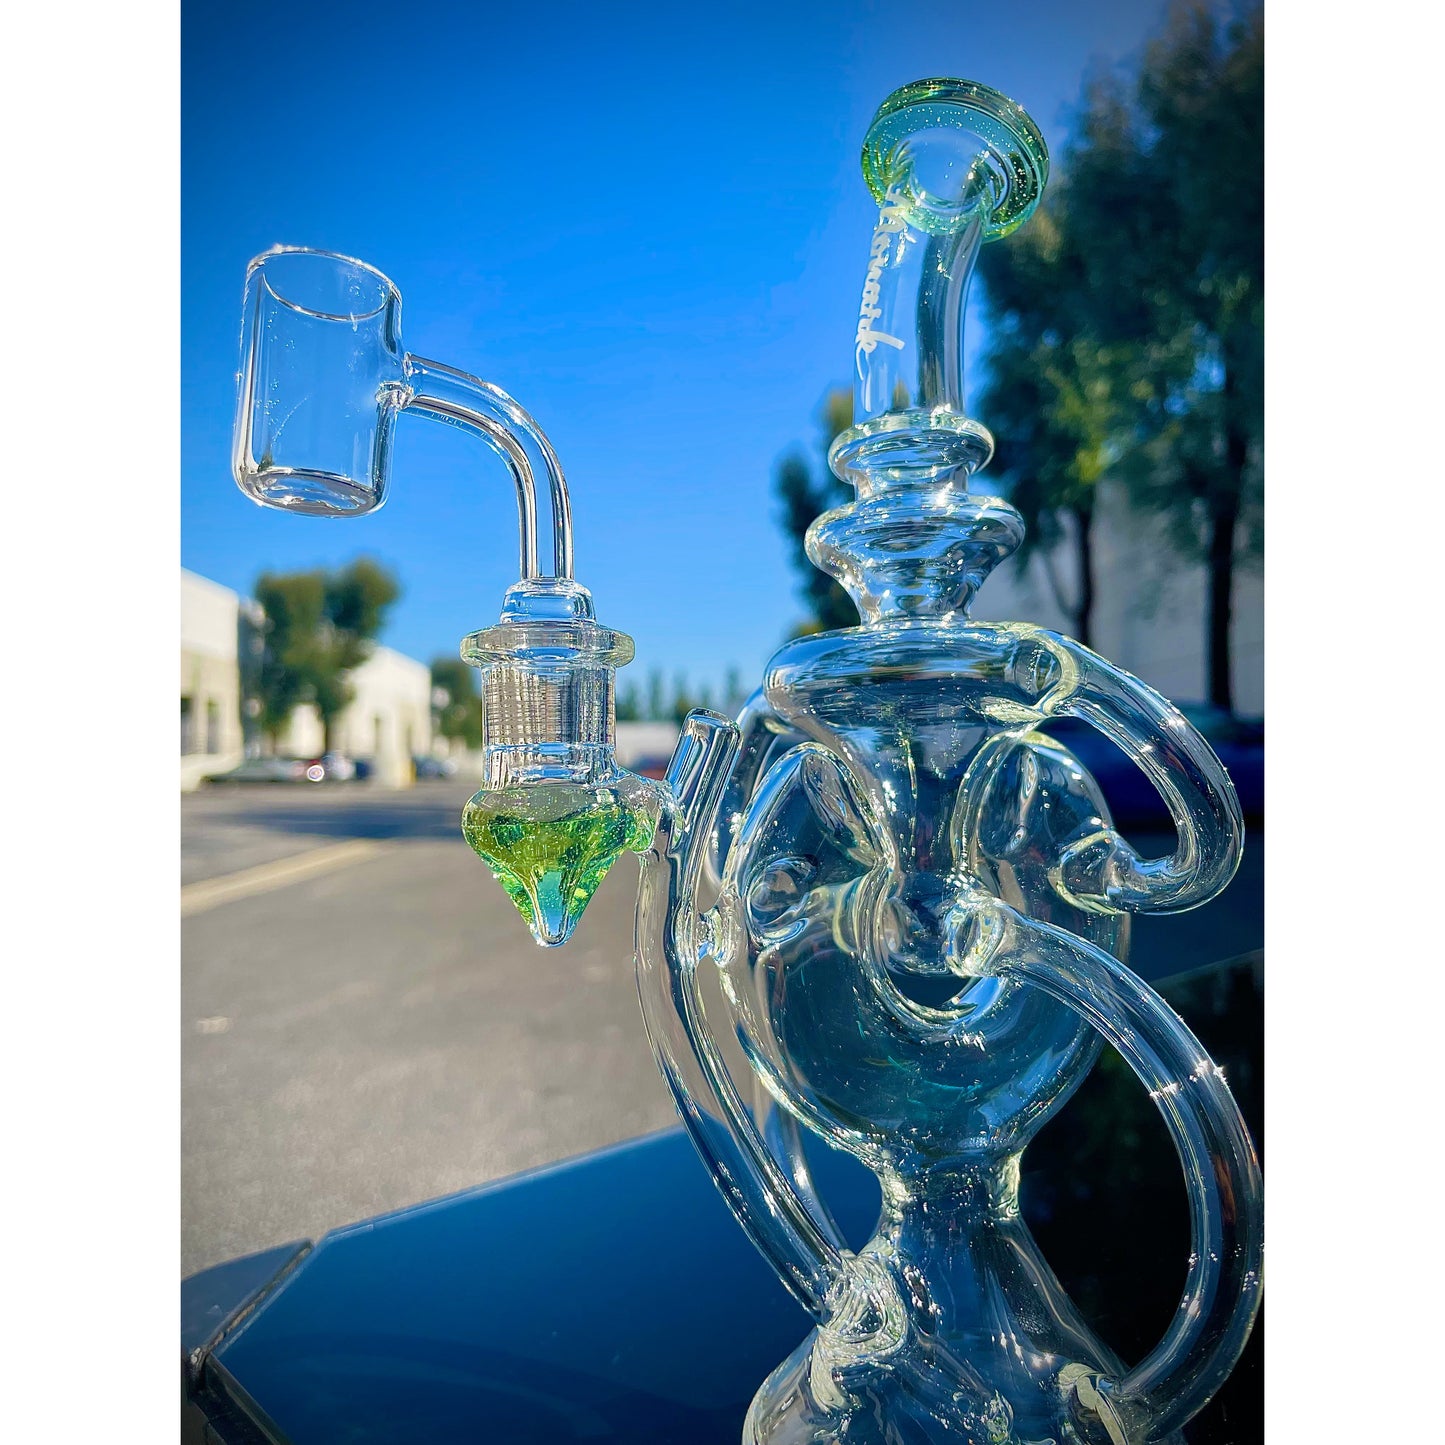 Monark Wu - Recycler with 14mm Female fitting